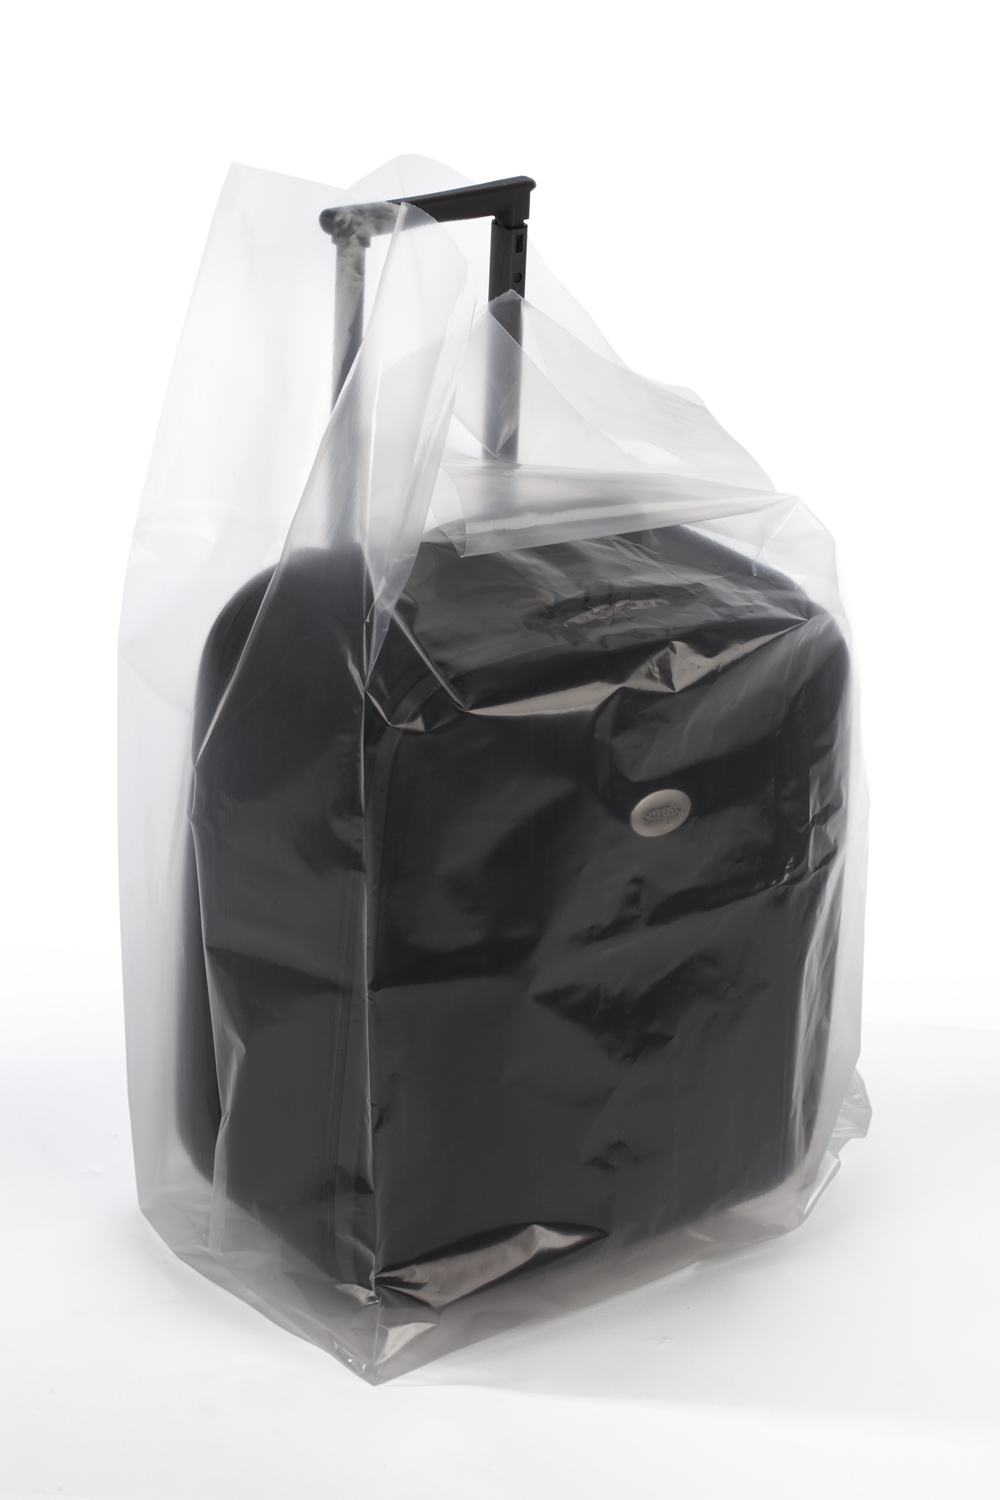 3 MIL Gusseted Poly Bags - 019-0118169 - 30